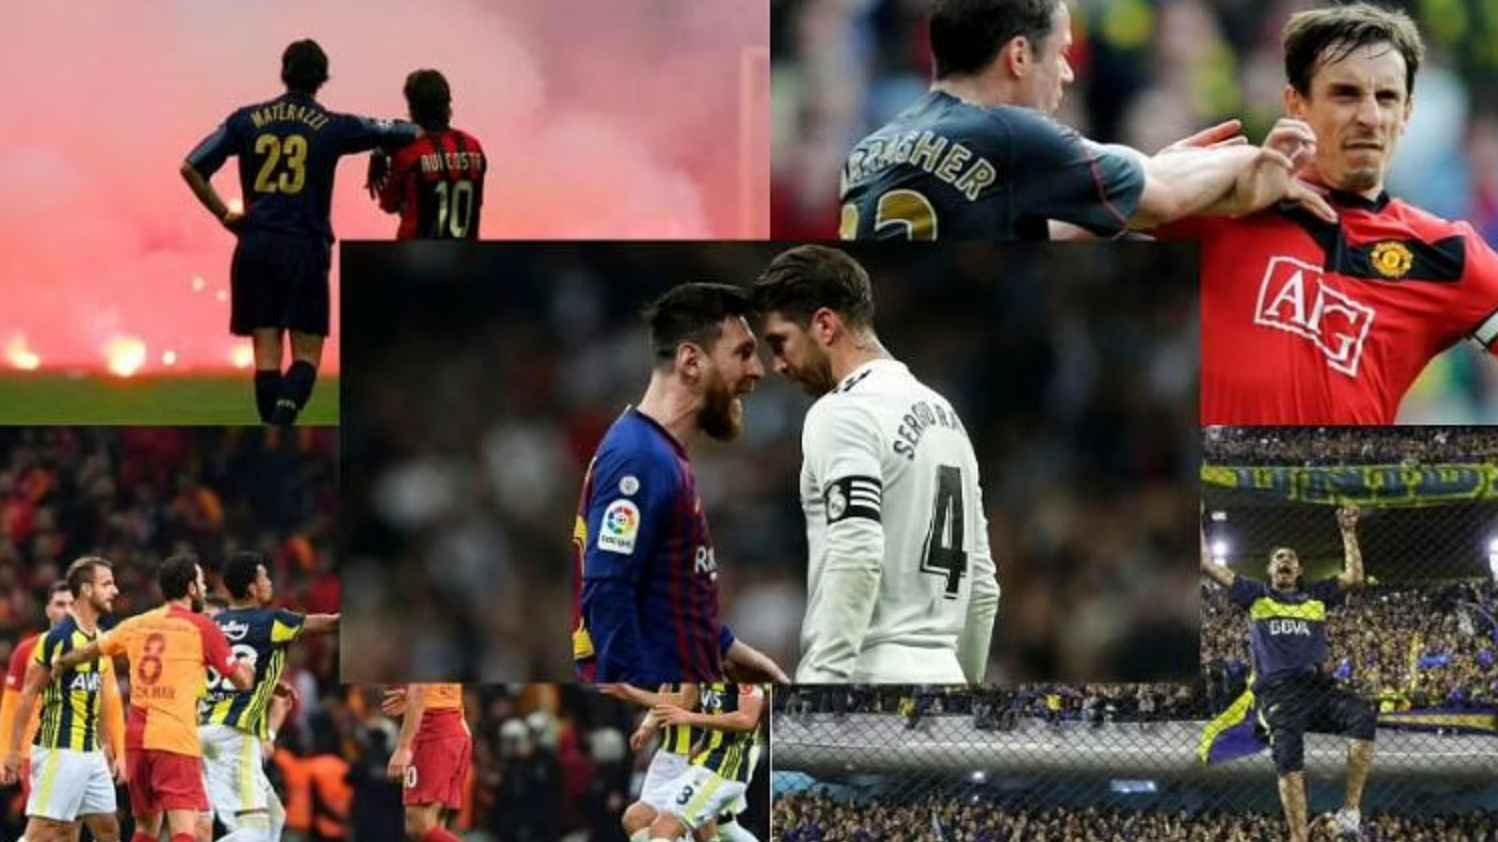 10 Biggest Sports Rivalries of all Time